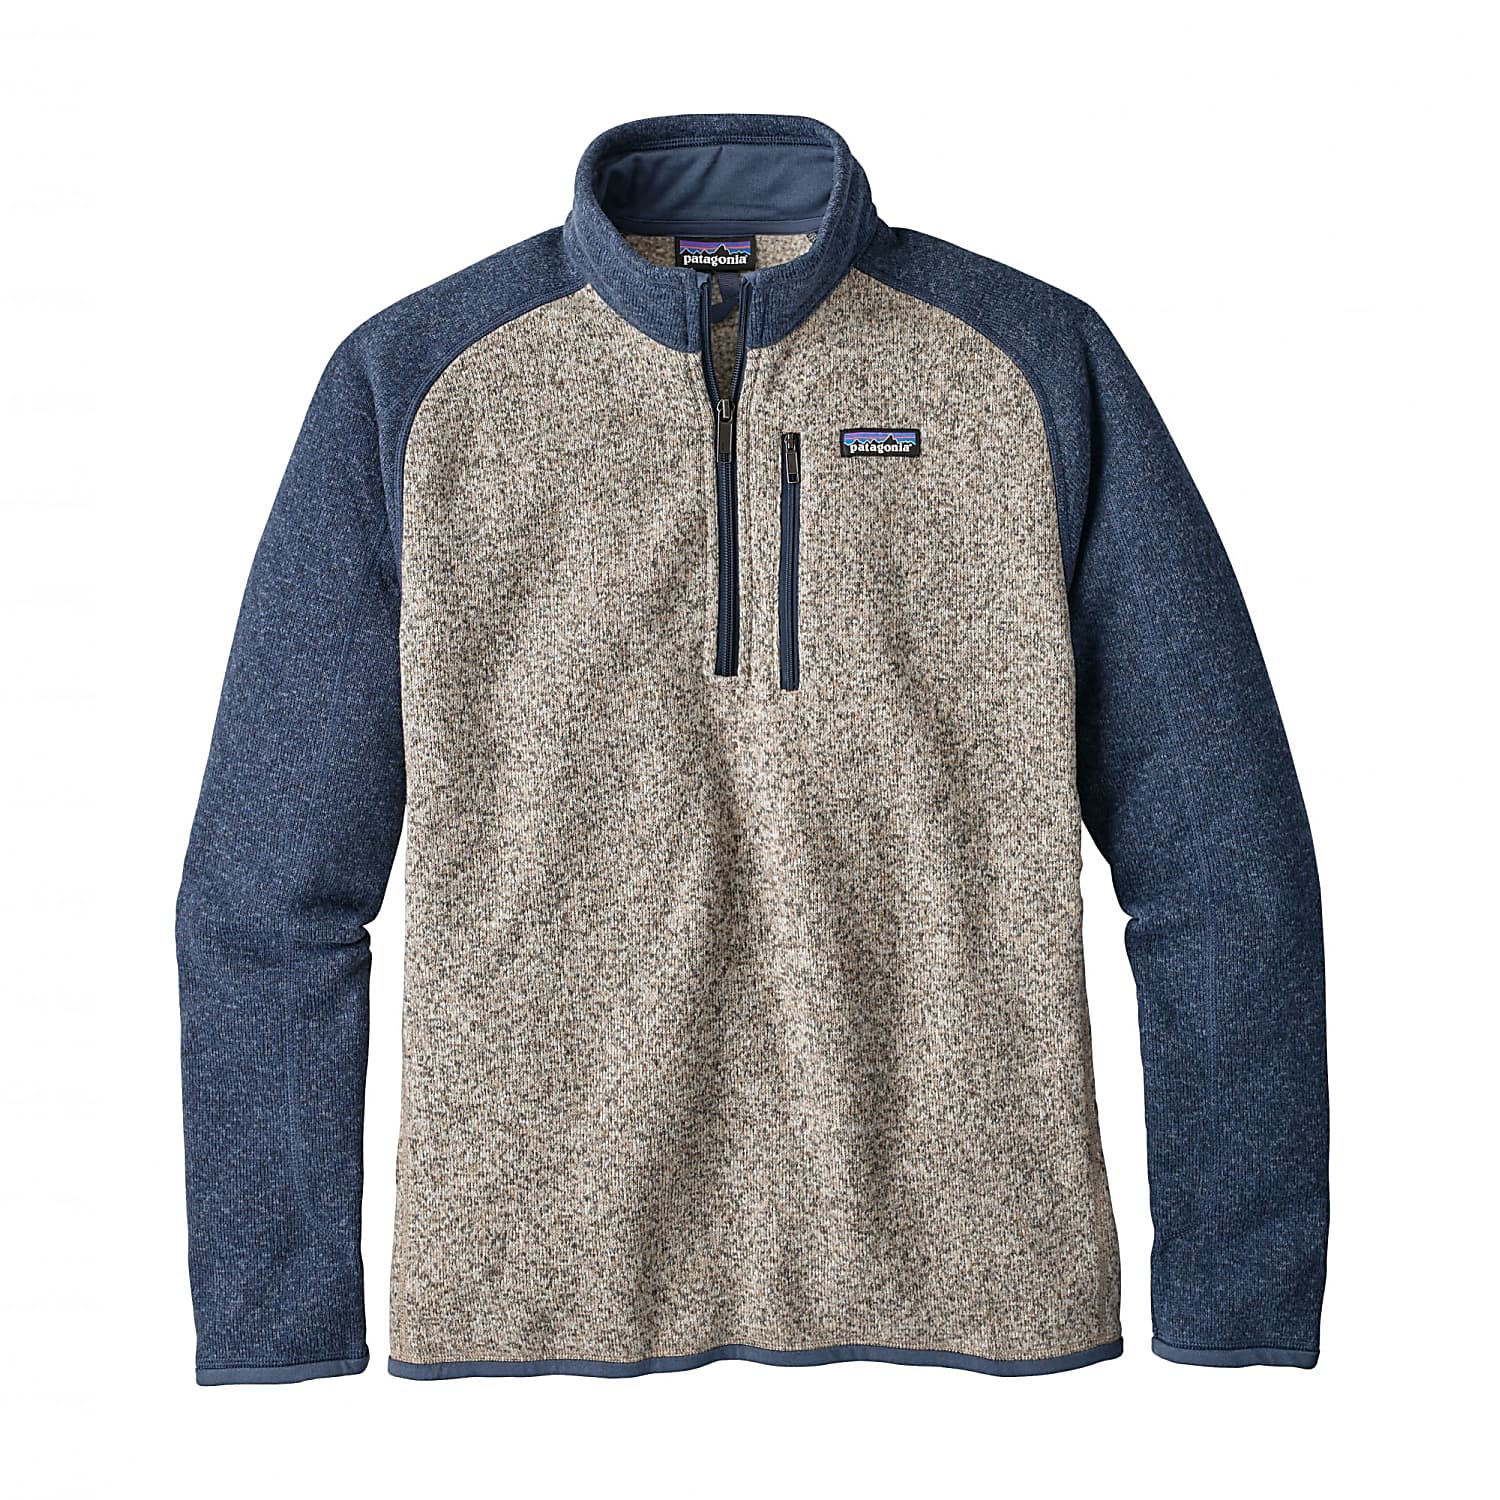 M BETTER 1/4 ZIP (STYLE SUMMER 2019), Bleached Stone W - Dolomite Blue - Fast and cheap shipping - www.exxpozed.com